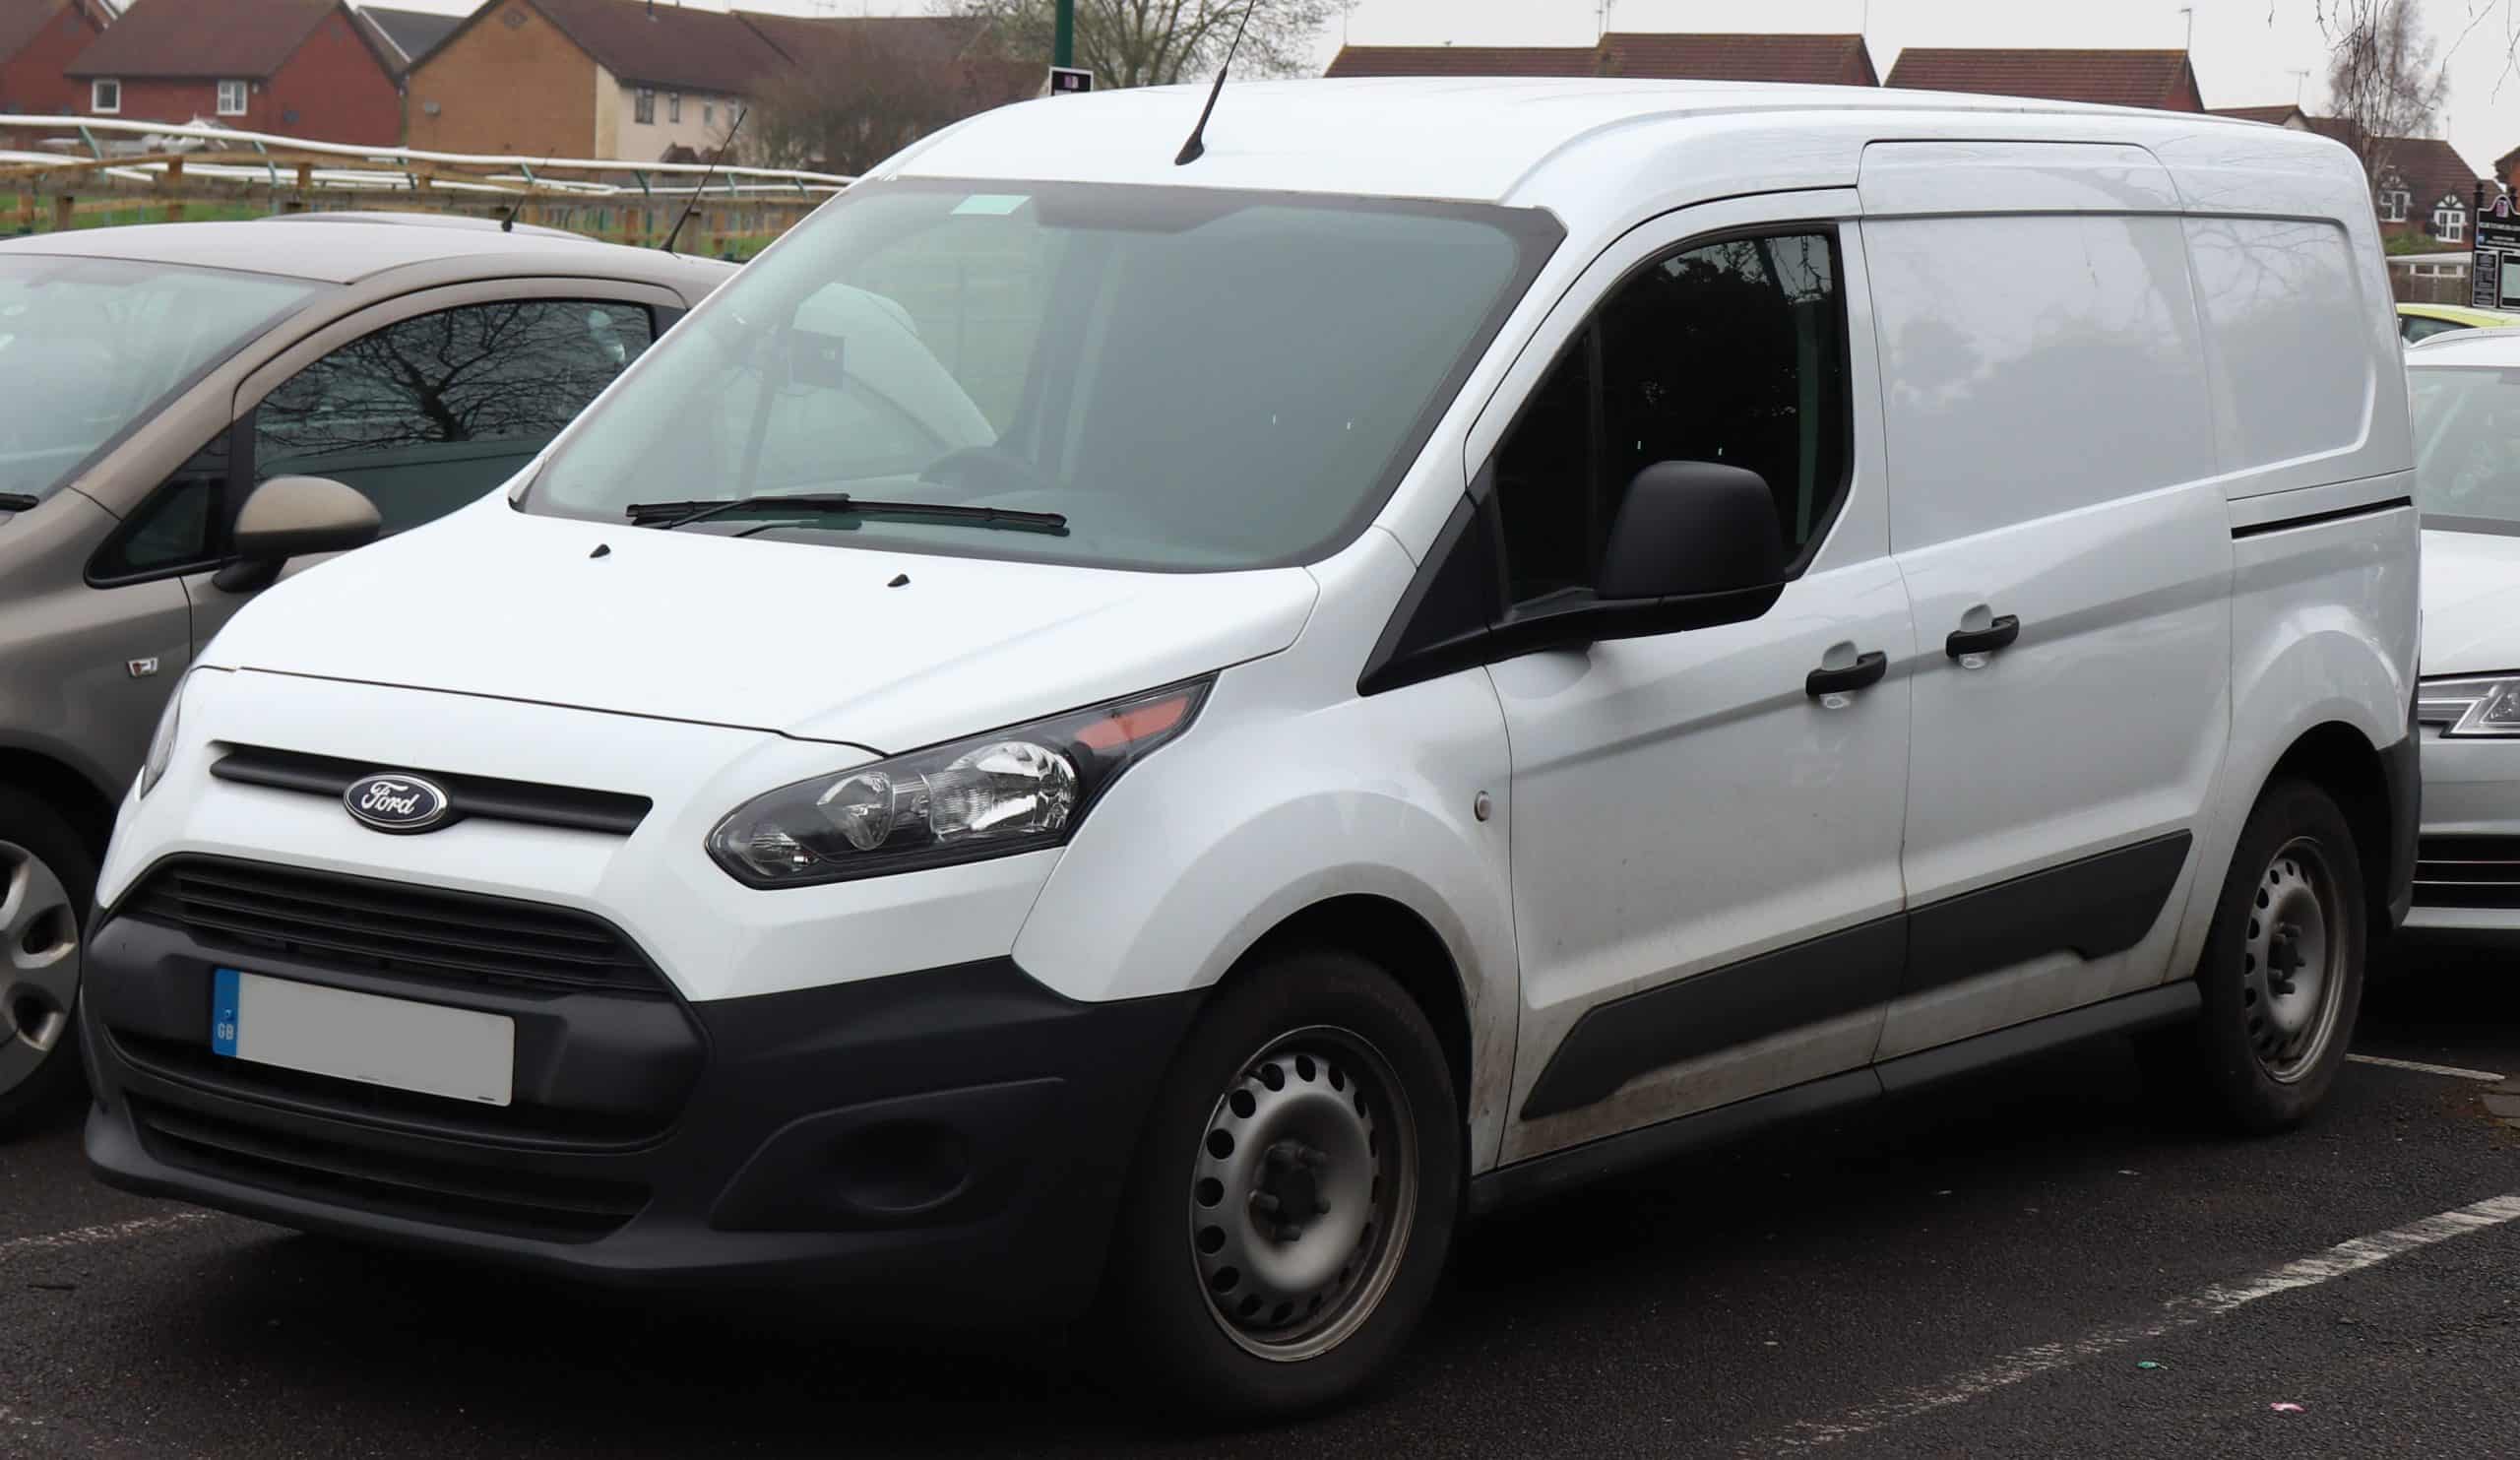 A white Ford Transit Connect van parked in a parking lot with other vehicles in the background.